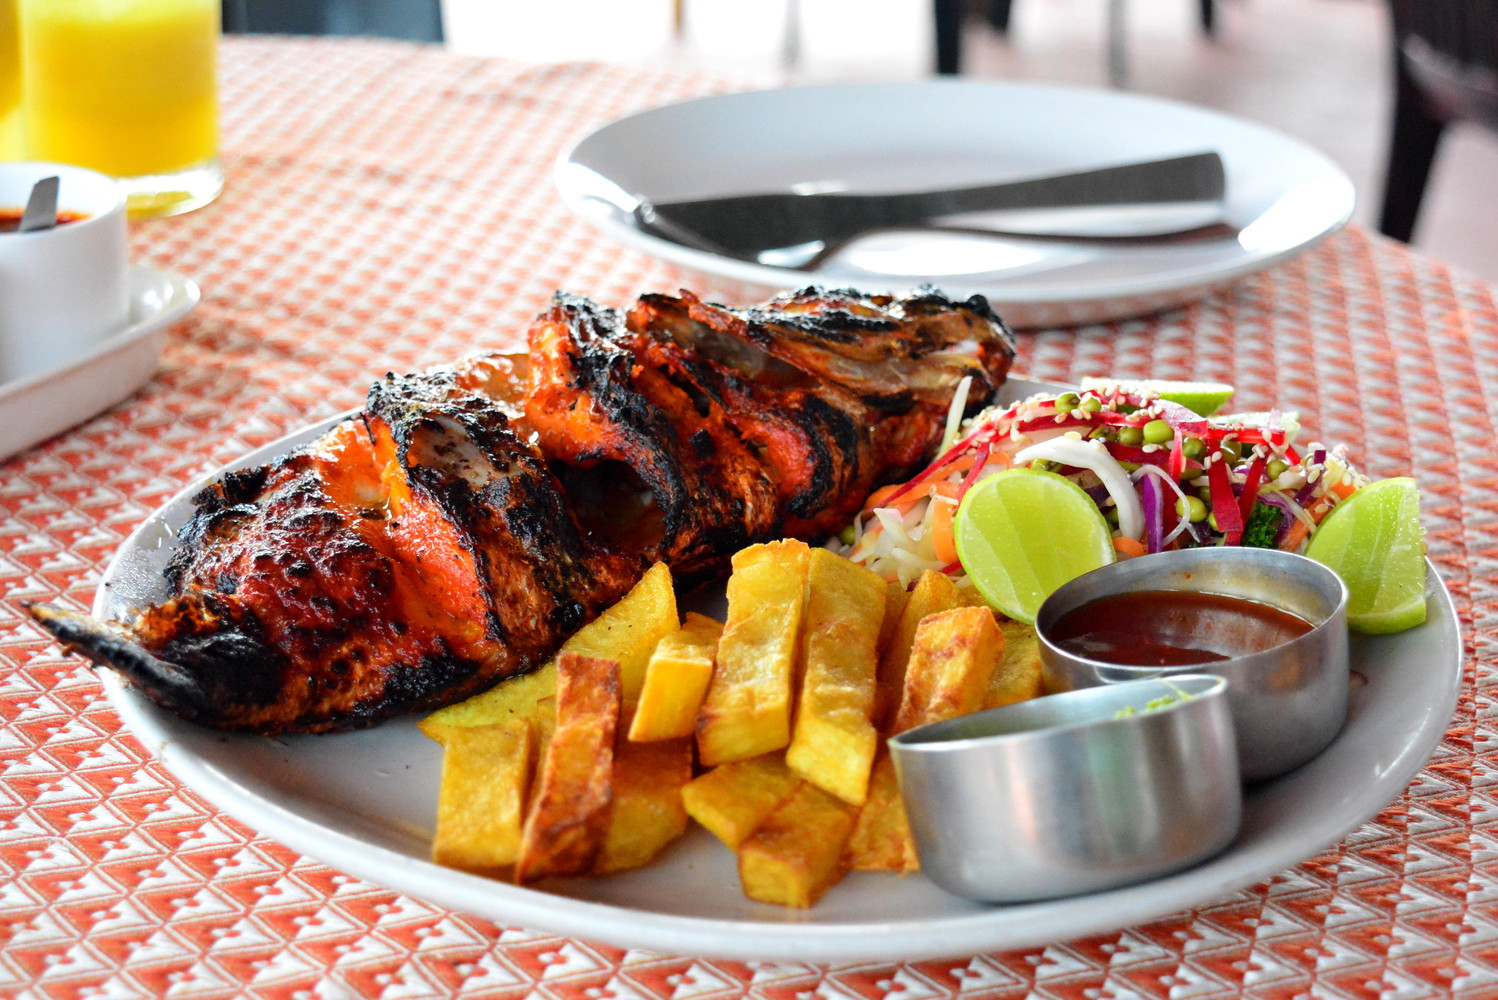 Tandoor red snapper served with fries, salad, and lemon slices